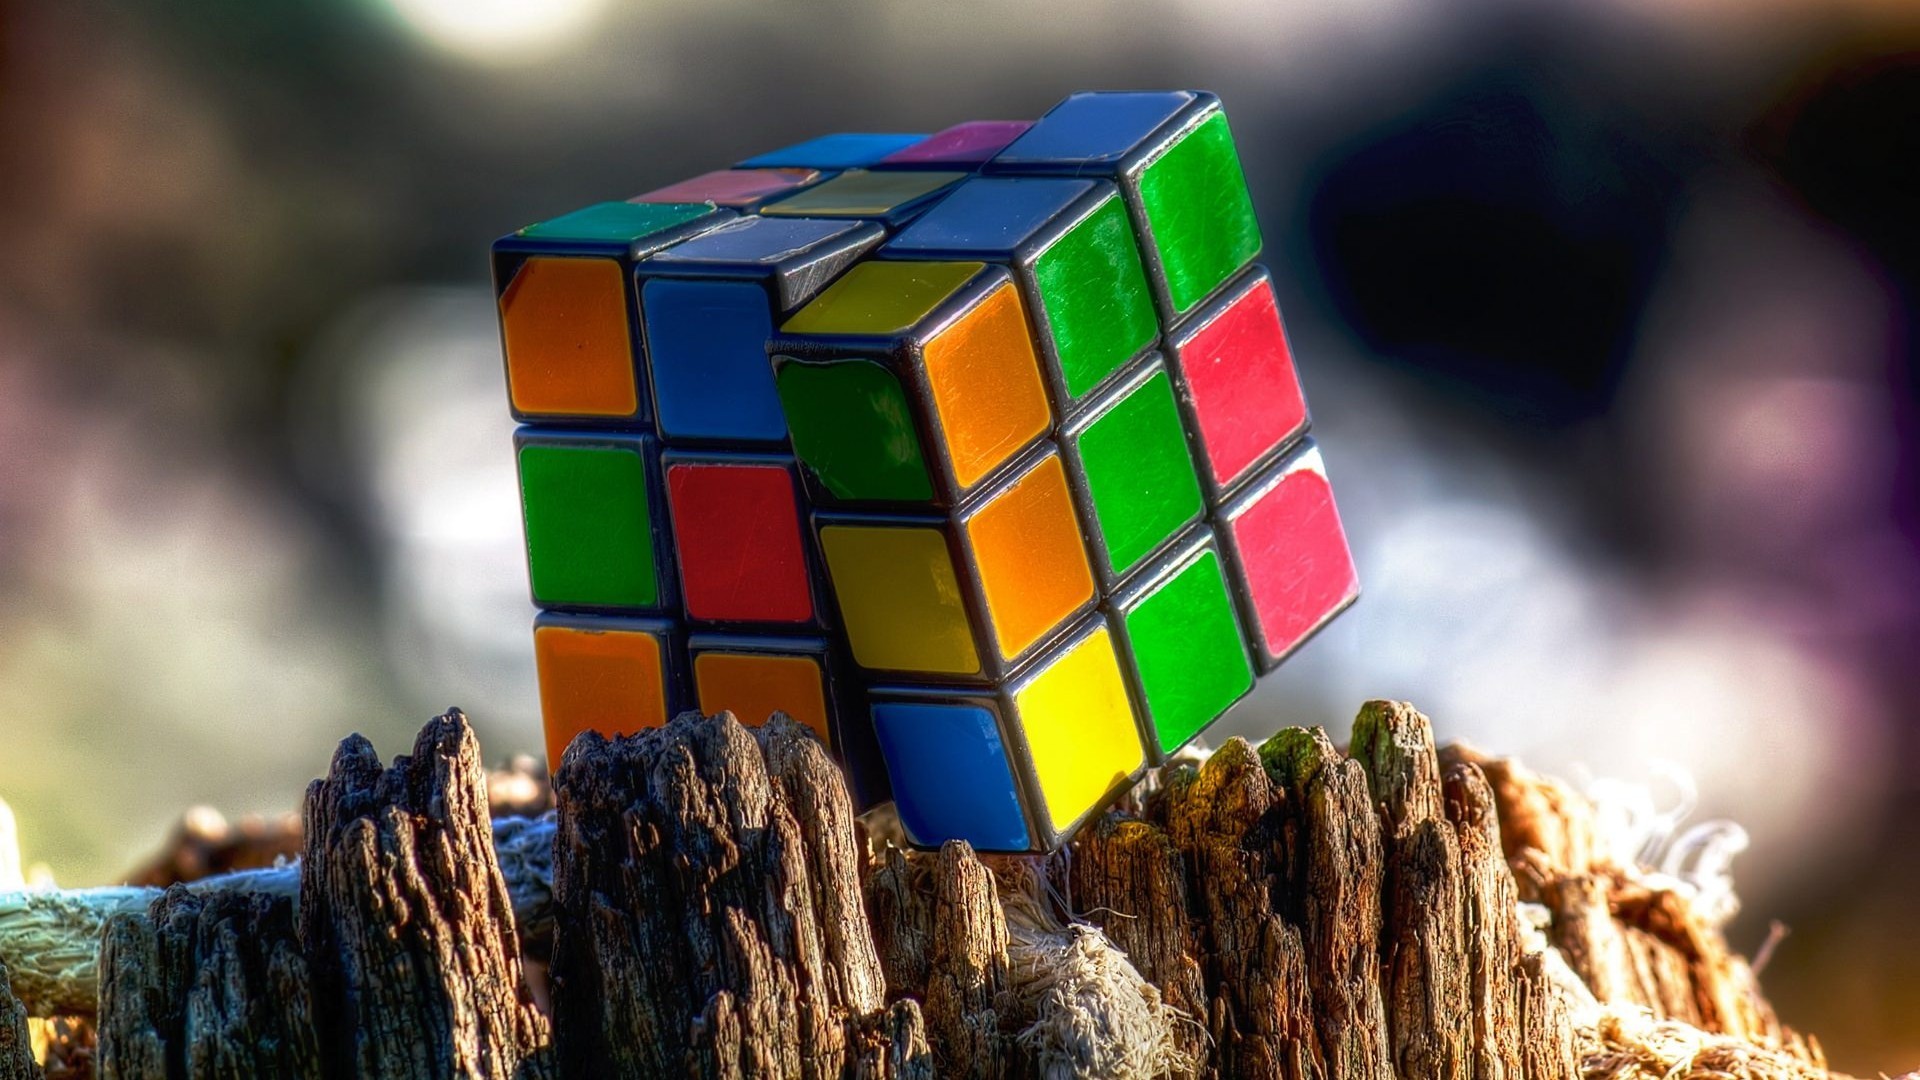 Rubiks Cube Colorful Toys 1920x1080